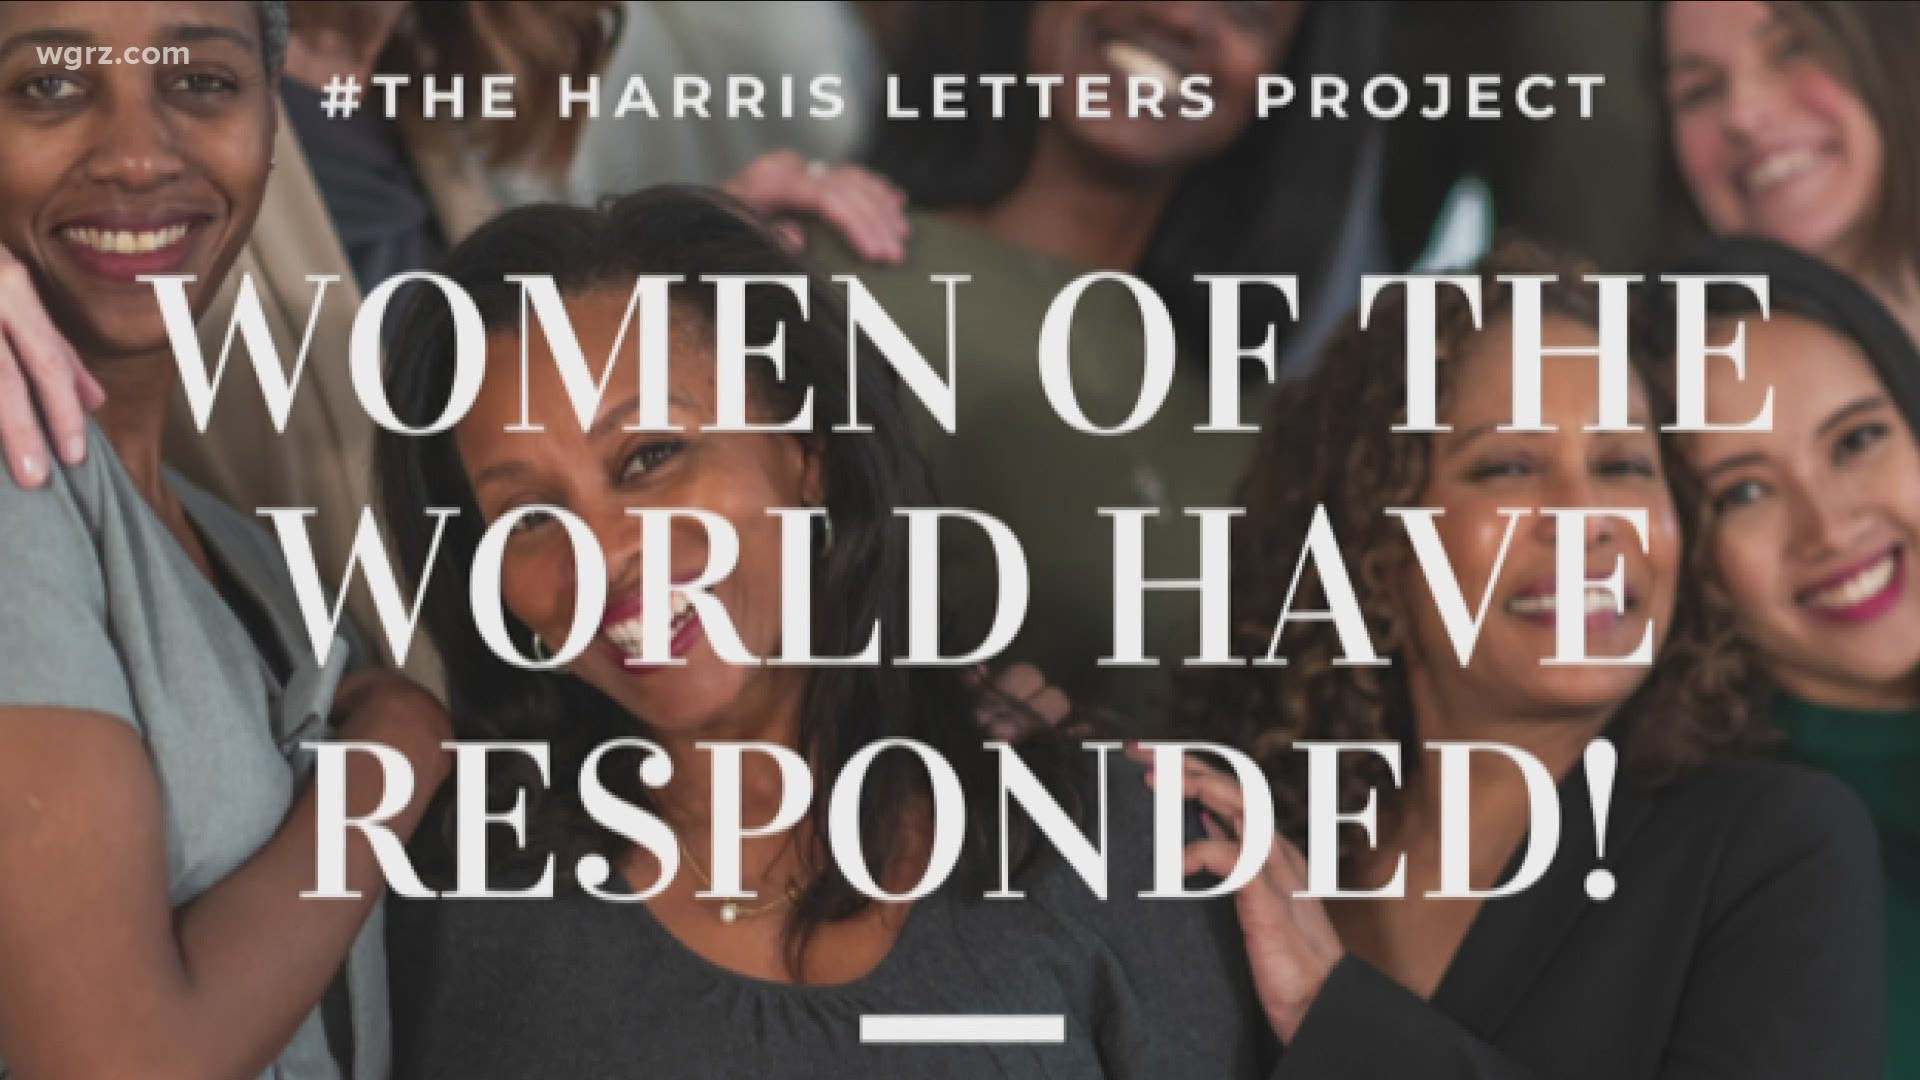 A local author who started a campaign to compile letters from women for Kamala Harris. The response was great and now production of a book is underway.